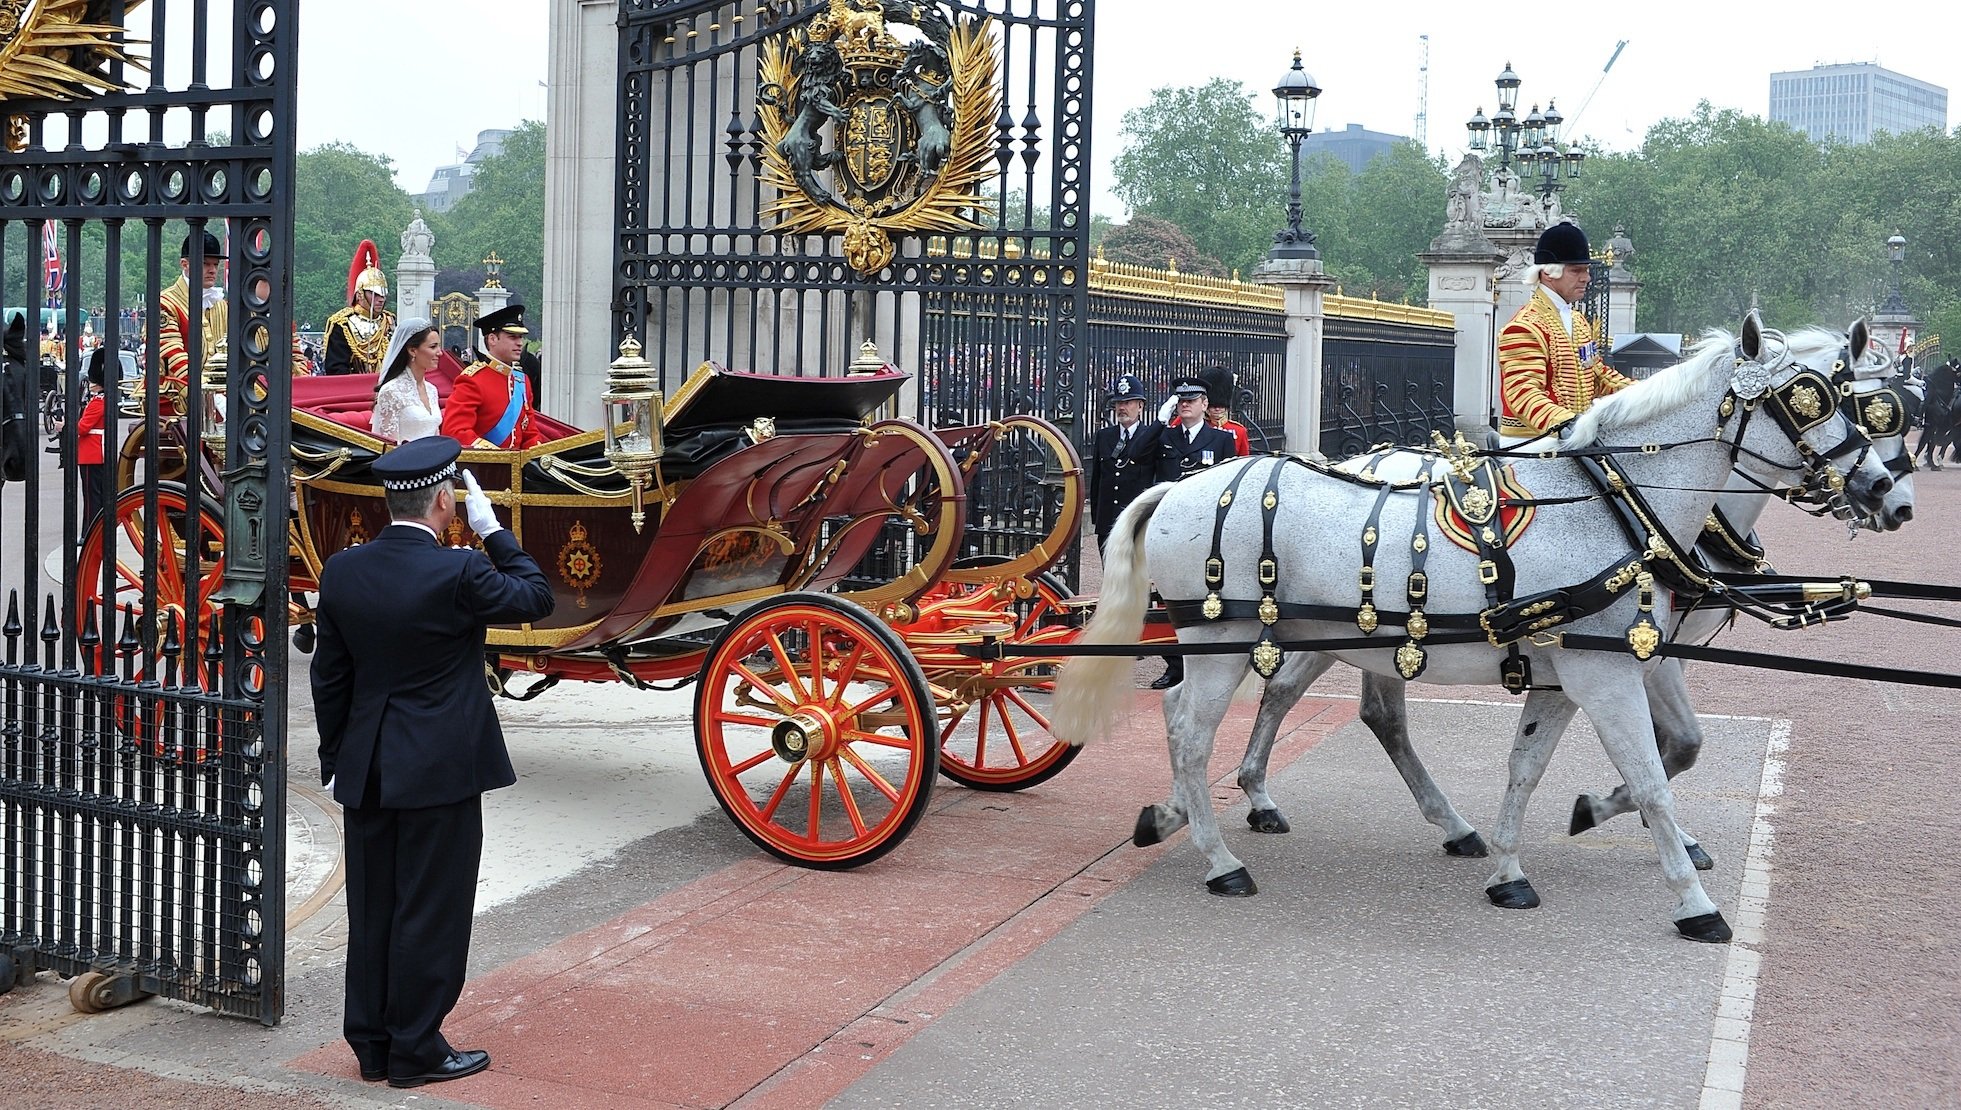 Prince William and Kate Middleton wedding horse and carriage